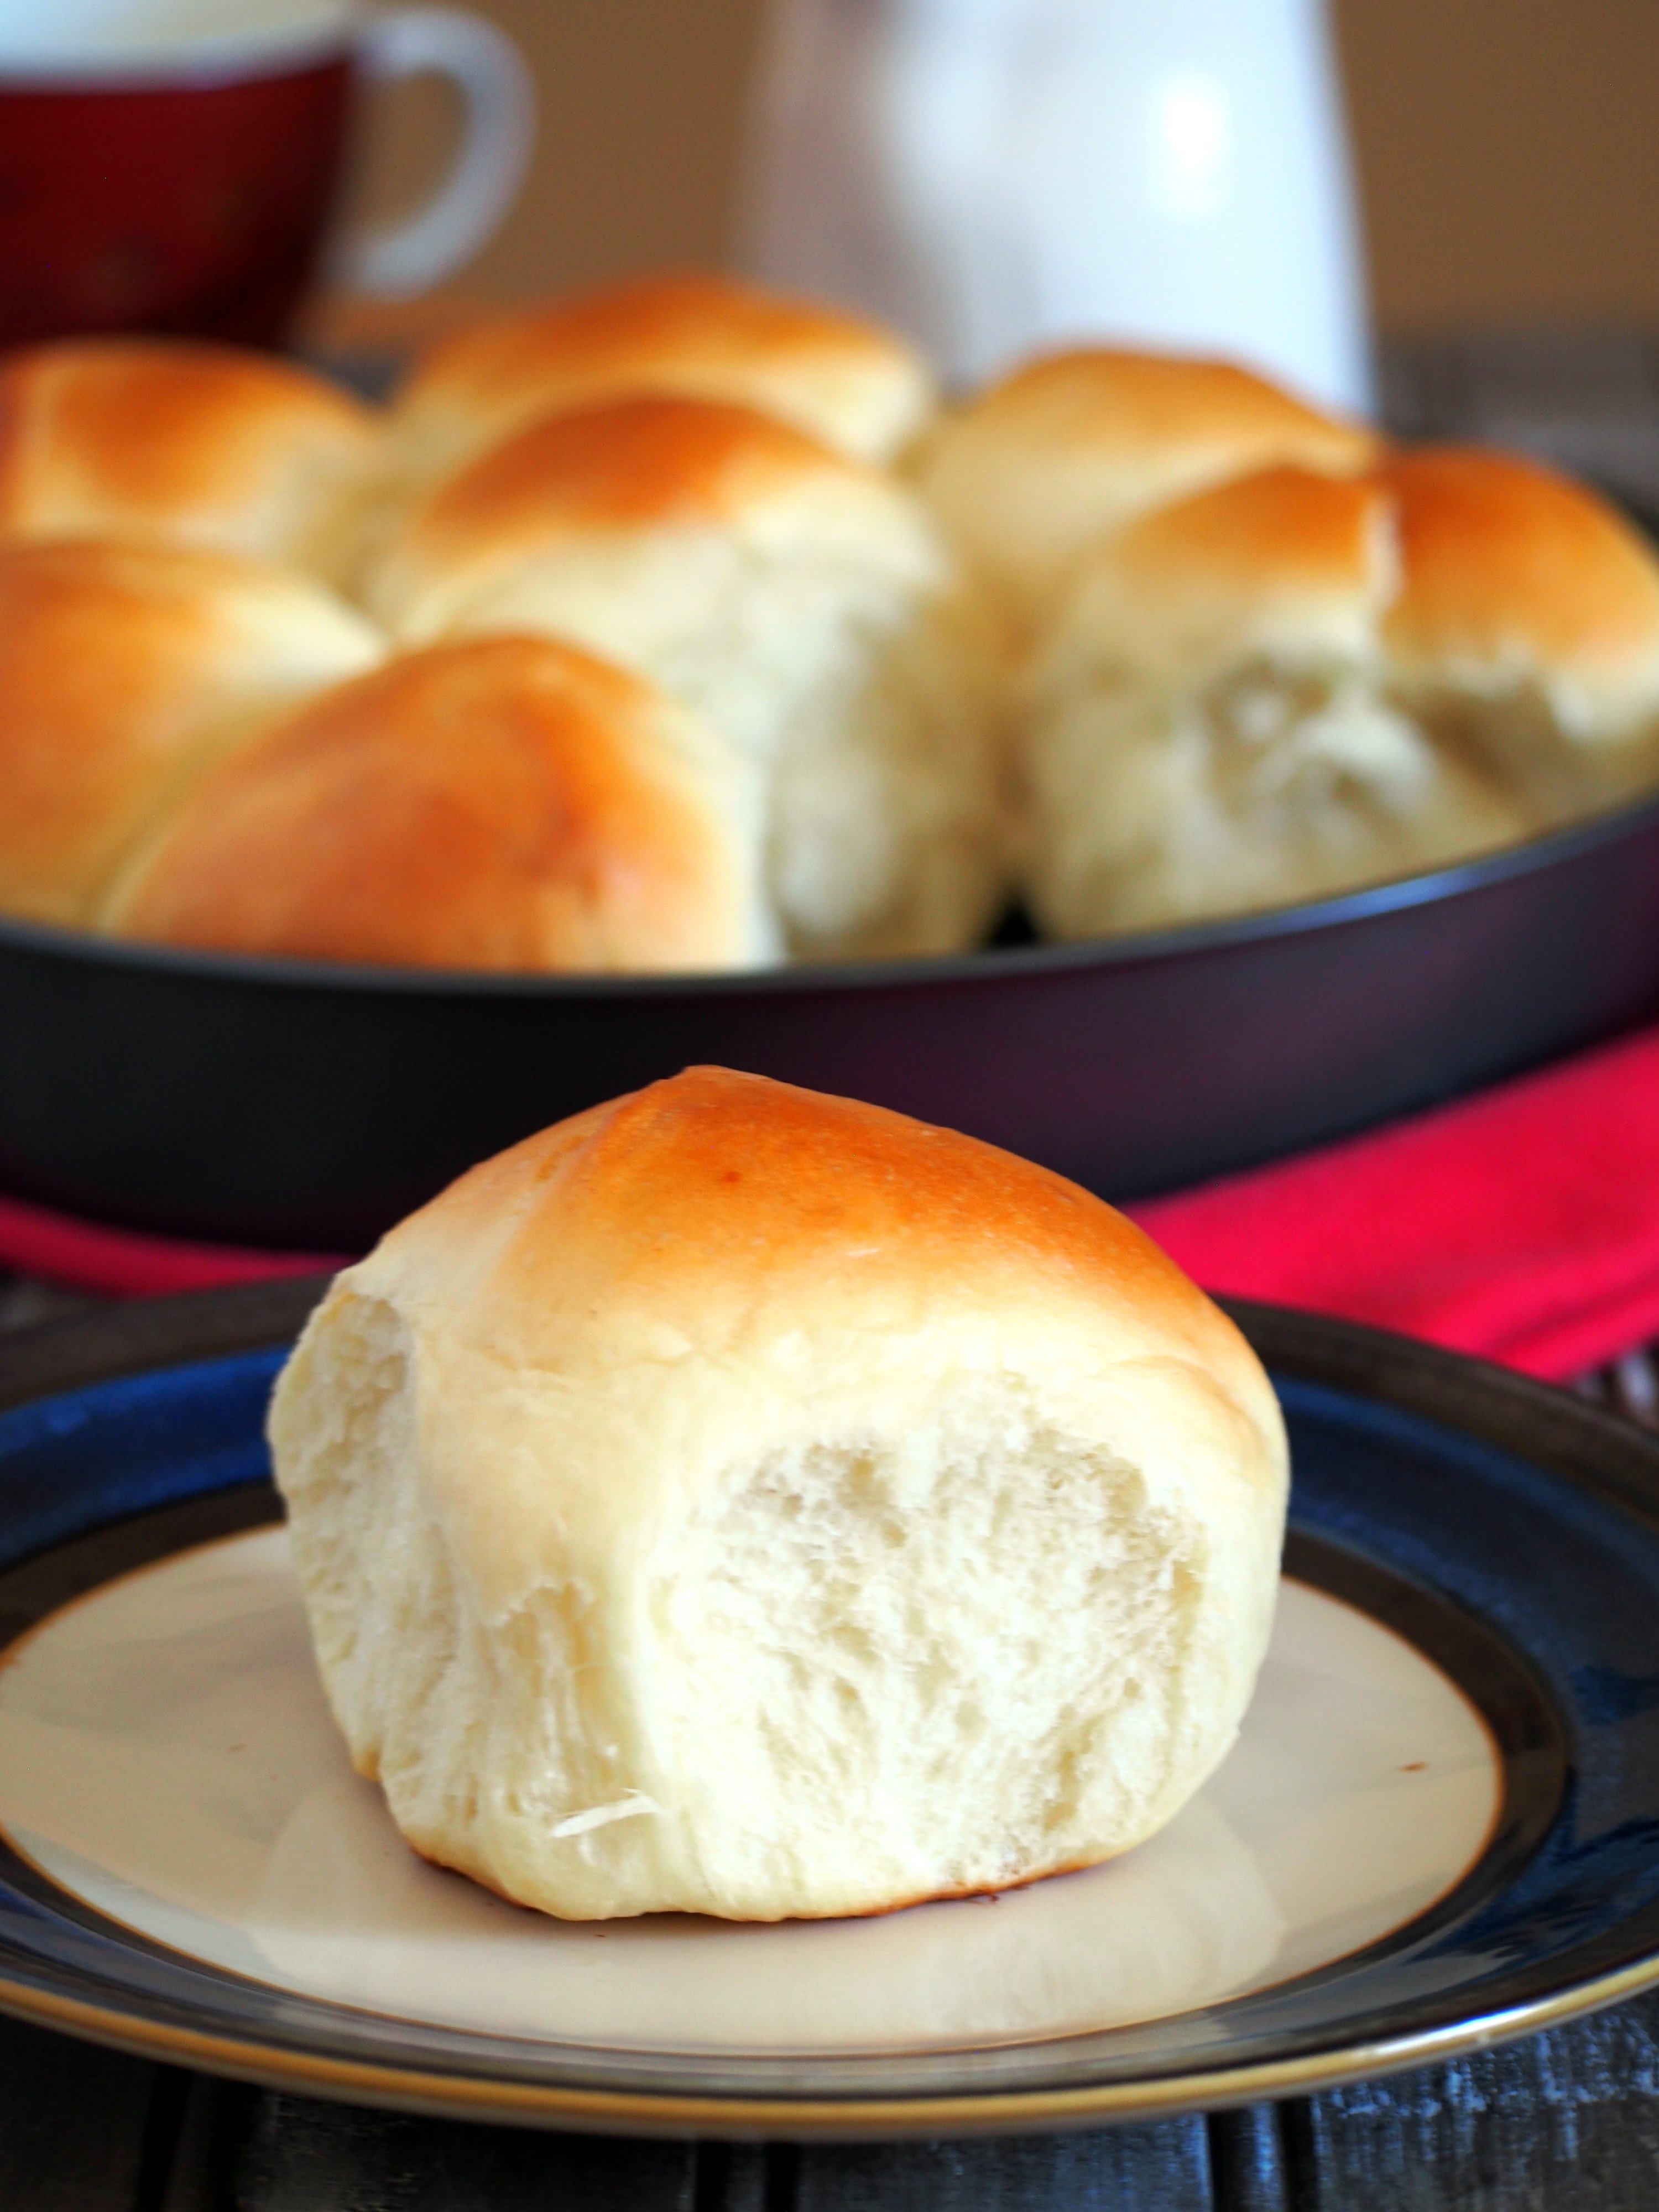 Japanese Milk Buns are known for their distinct, milky taste and their soft, melt in your mouth texture. These soft dinner rolls are perfect with any kind of jam or spread but are delicious on their own.